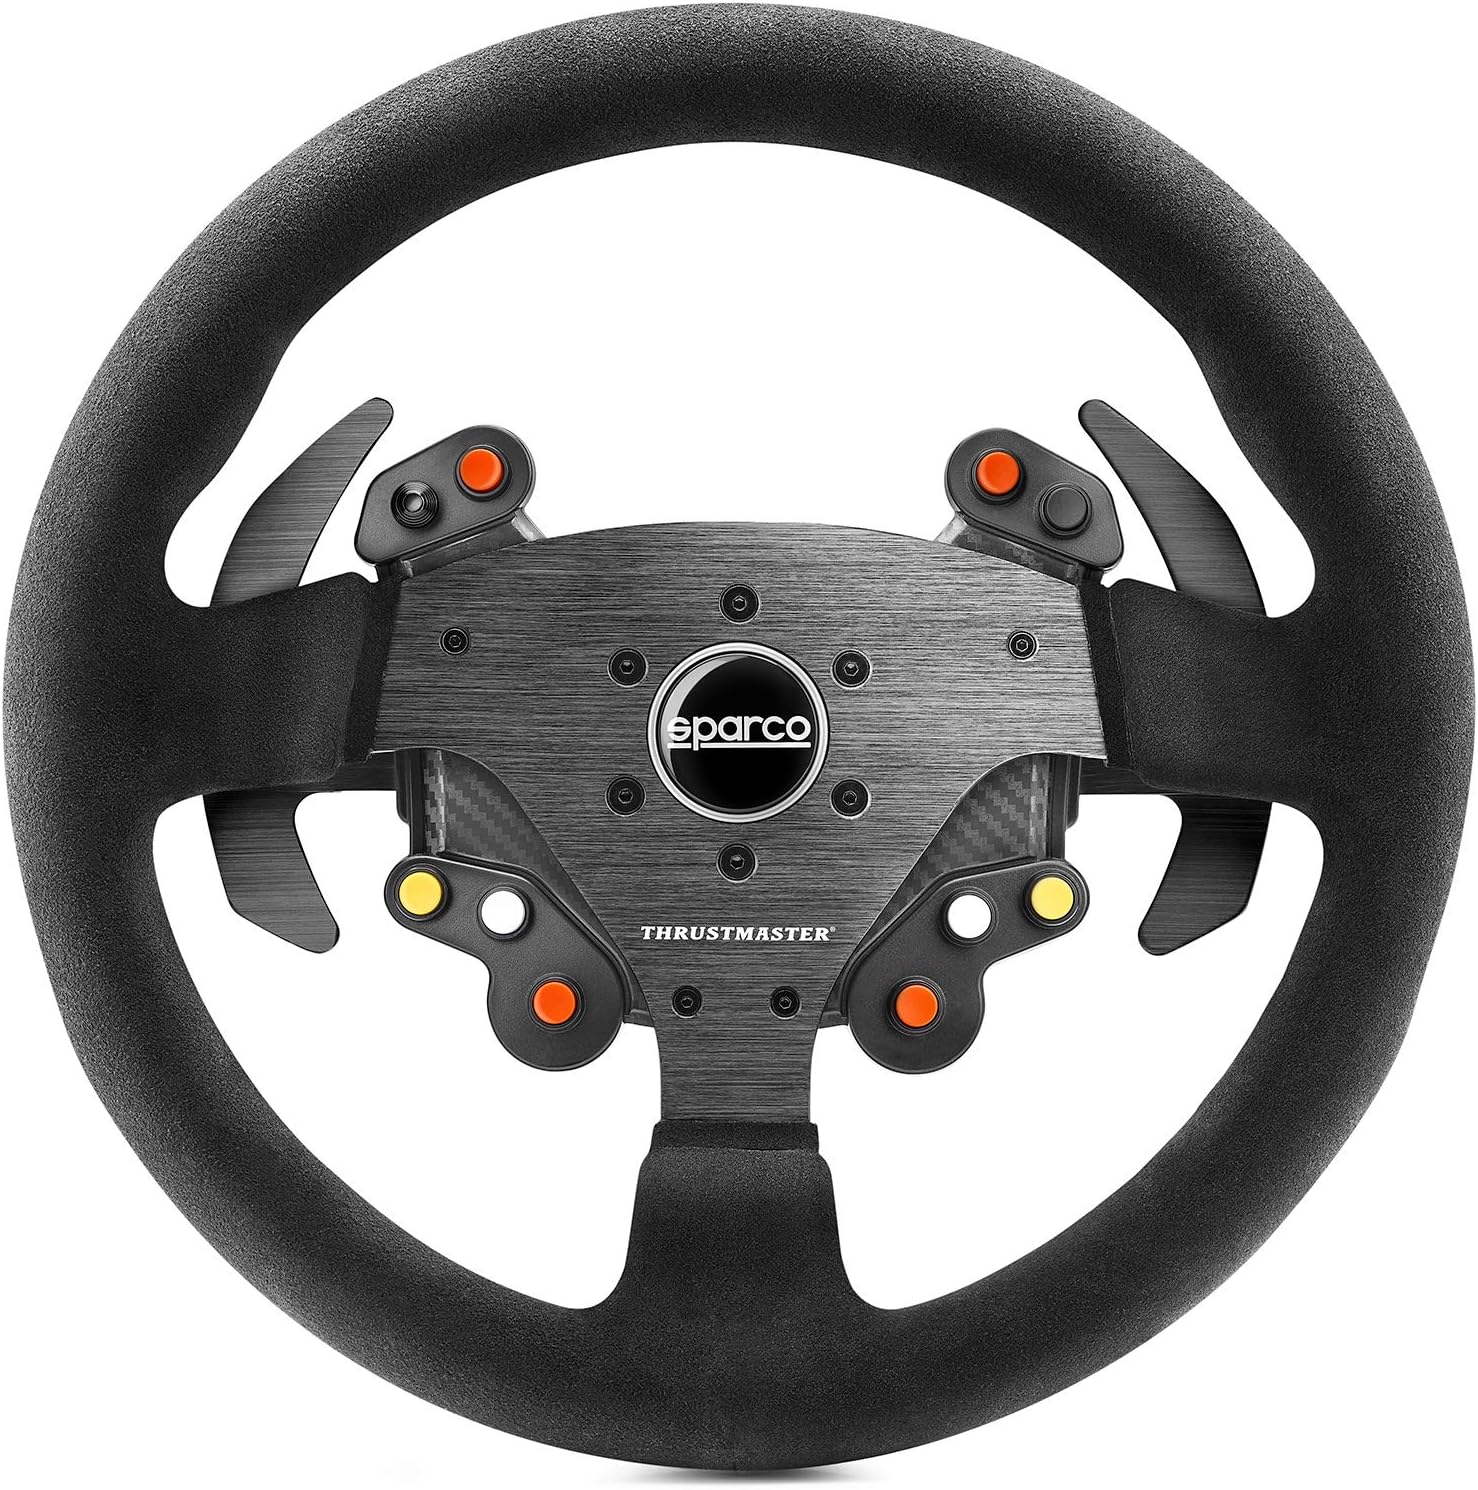 Sparco Rally Wheel R383 Add-On